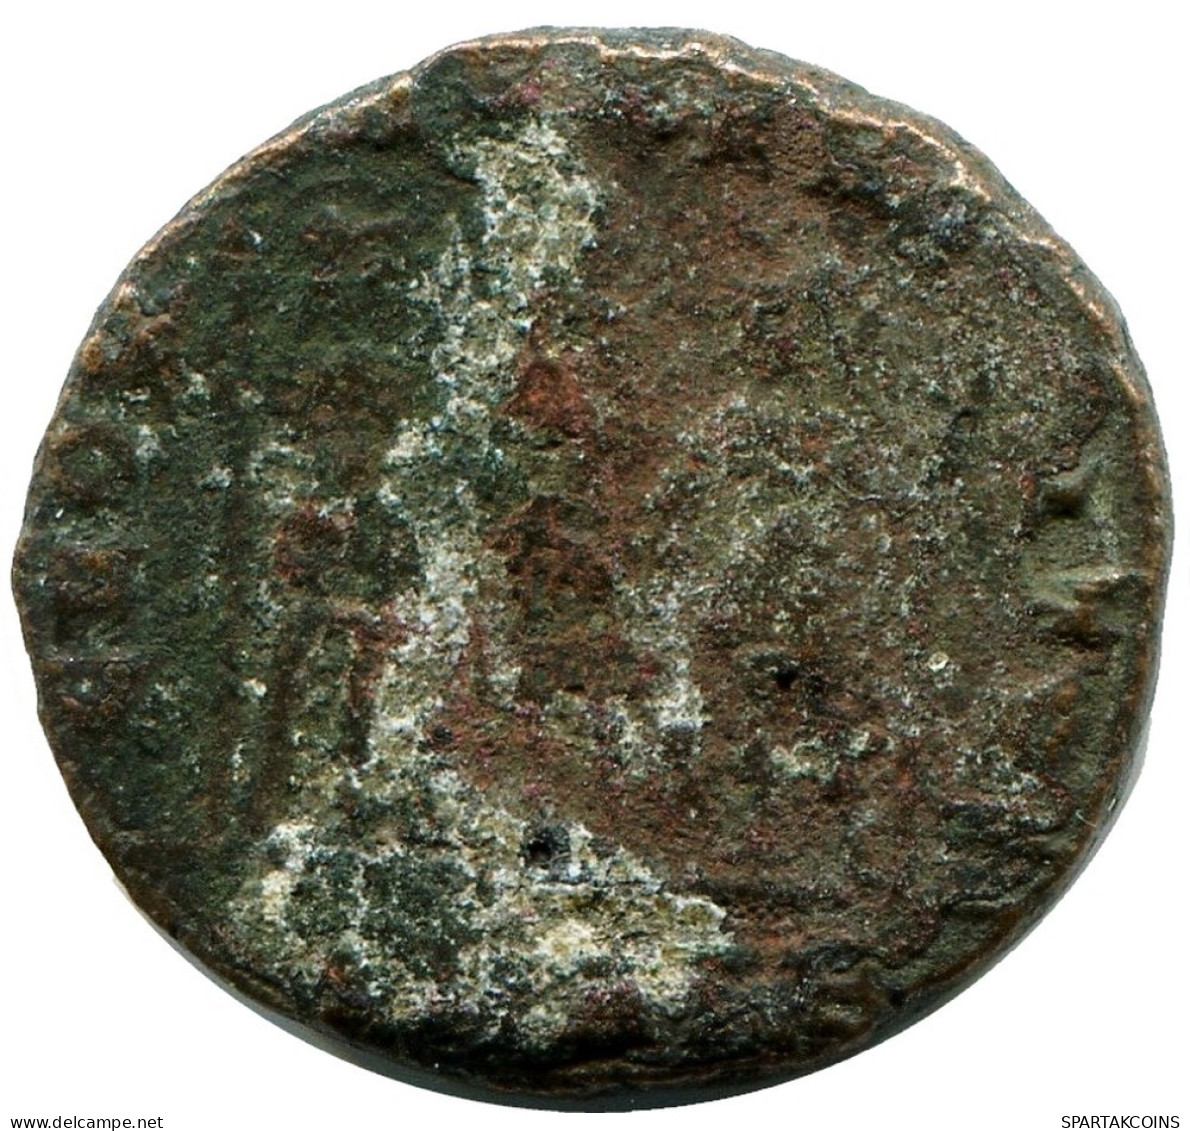 CONSTANS MINTED IN ALEKSANDRIA FROM THE ROYAL ONTARIO MUSEUM #ANC11419.14.F.A - L'Empire Chrétien (307 à 363)